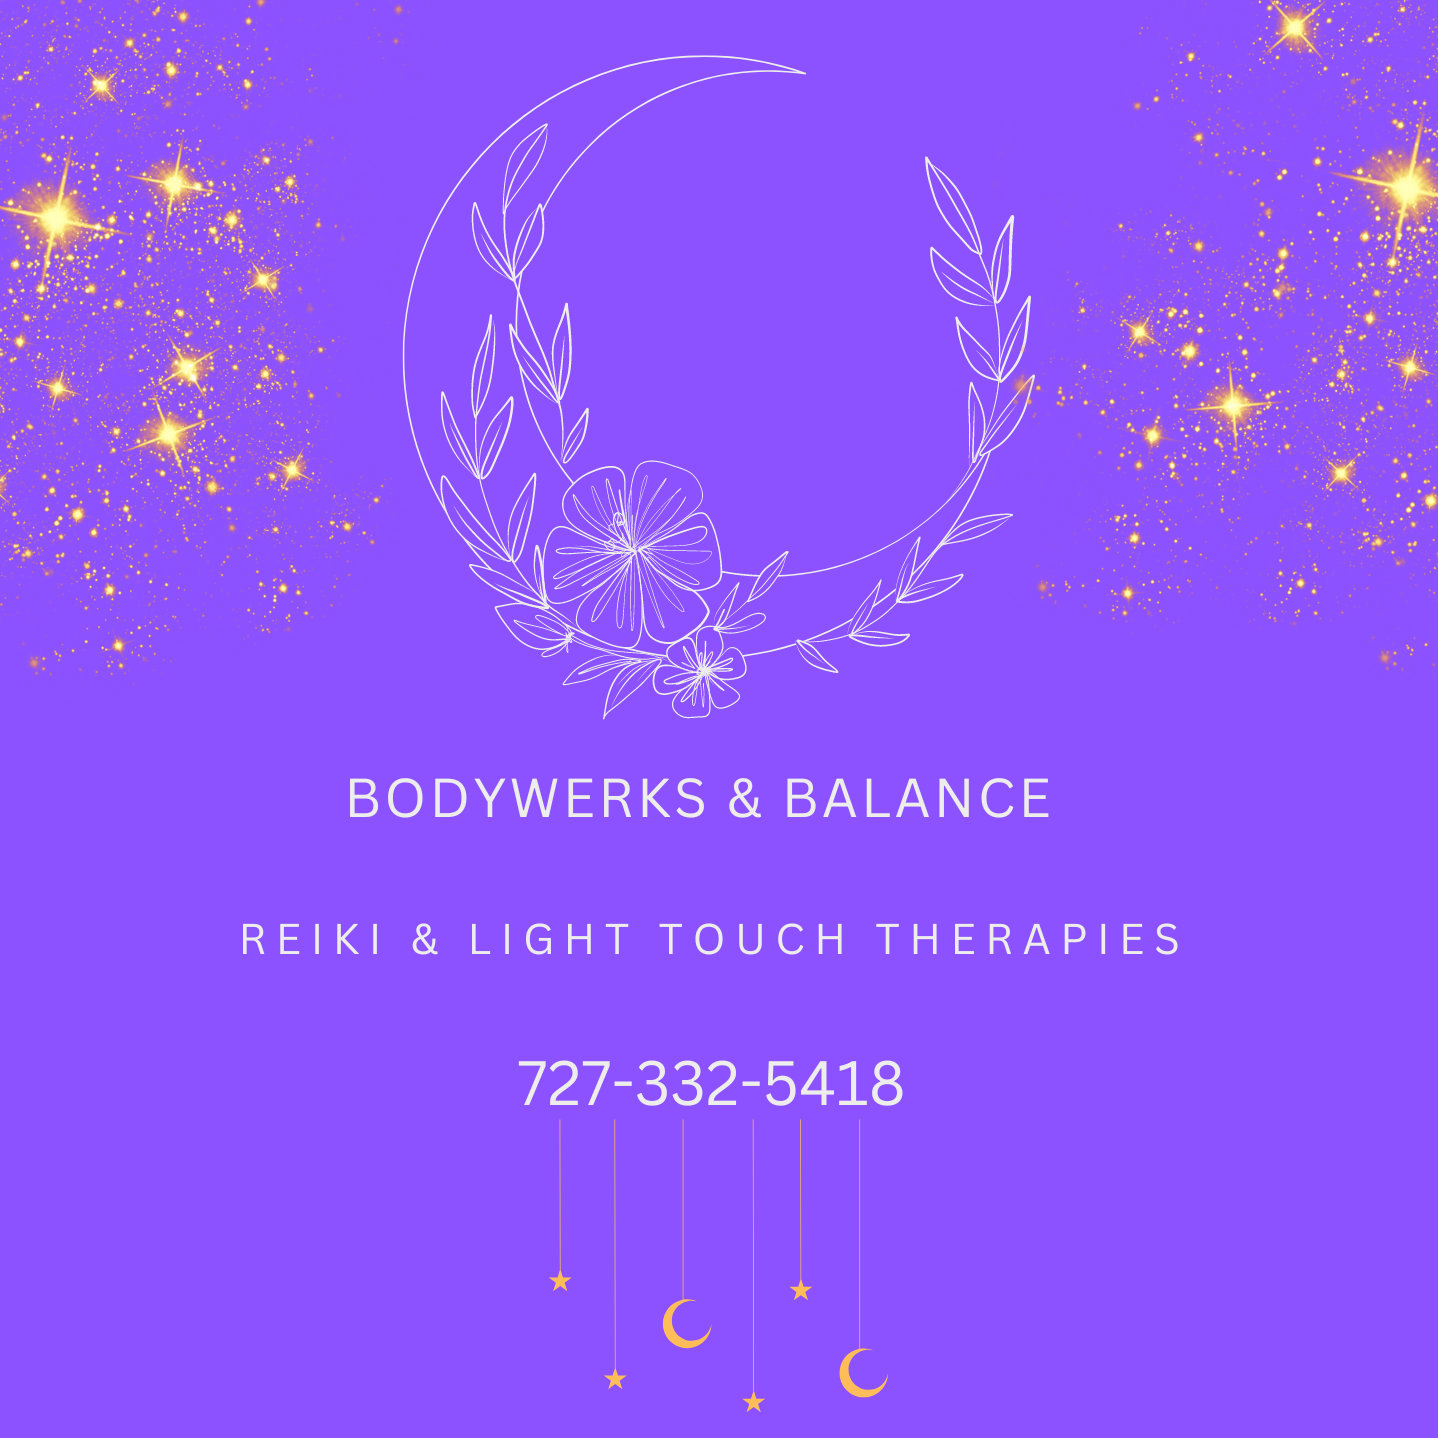 Bodywerks and Balance Reiki & Light Touch Therapy located in Powell WY.